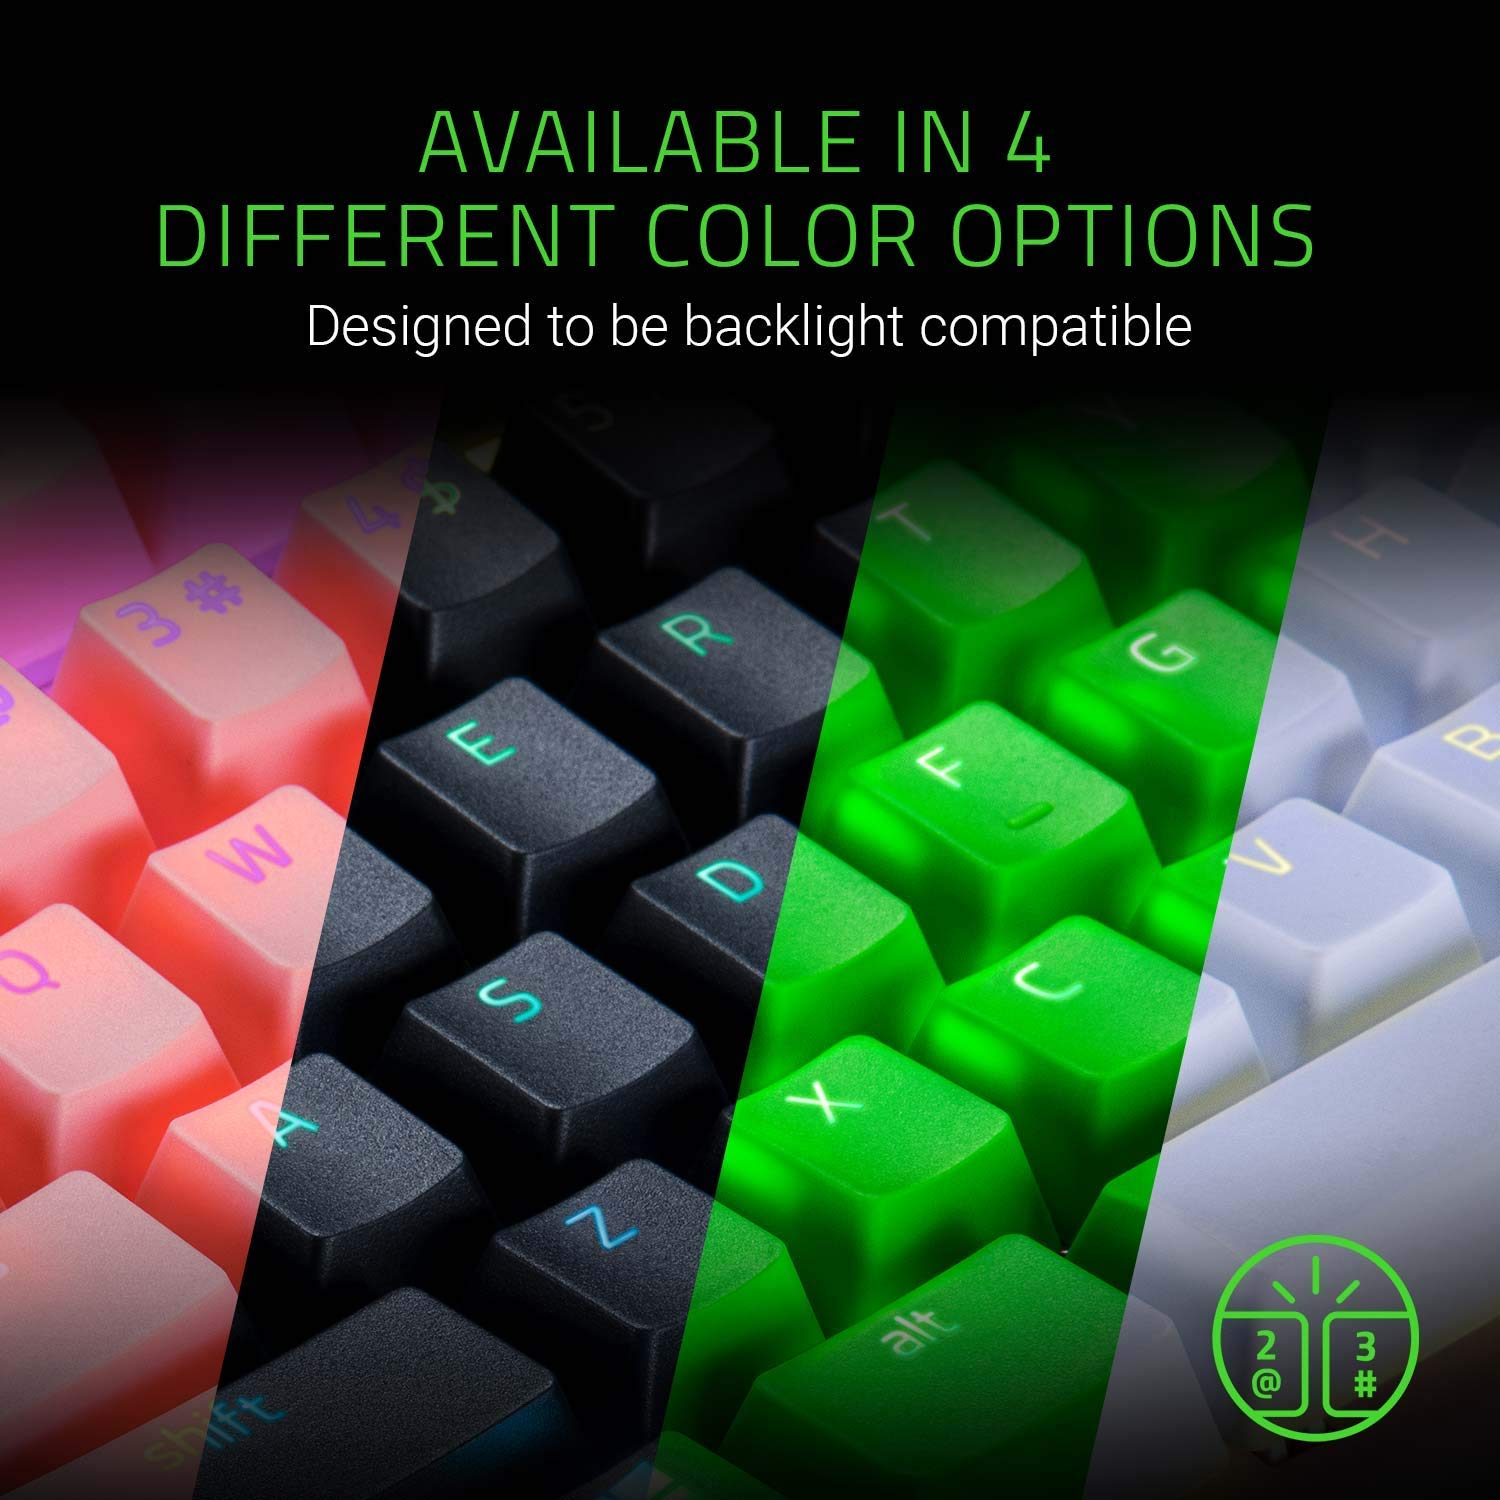 Razer Doubleshot PBT Keycap Upgrade Set for Mechanical and Optical Keyboards - Compatible with Standard 104/105 US and UK Layouts - Green -RC21-01490400-R3M1-KEYBOARD-RAZER-computerspace